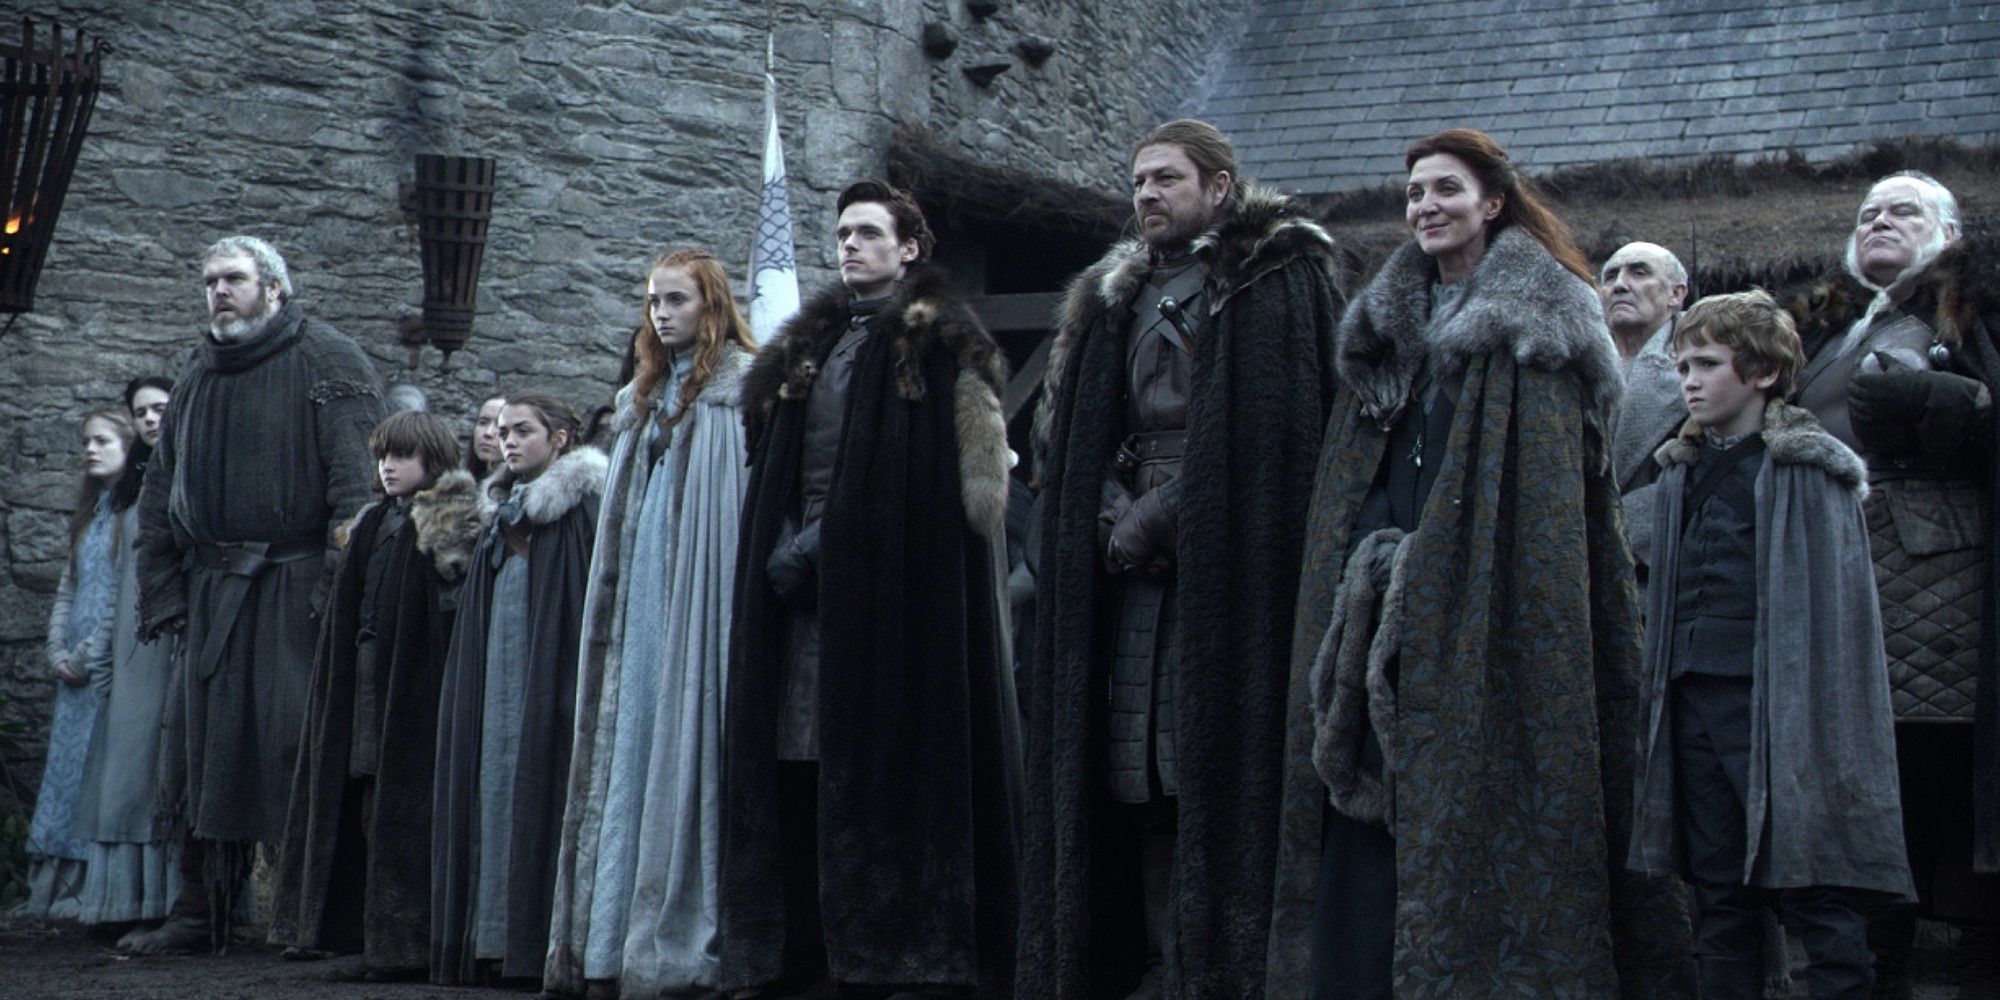 Michelle Fairley, Sean Bean, Richard Madden, Sophie Turner, Maisie Williams and Isaac Hempstead-Wright in Game of Thrones